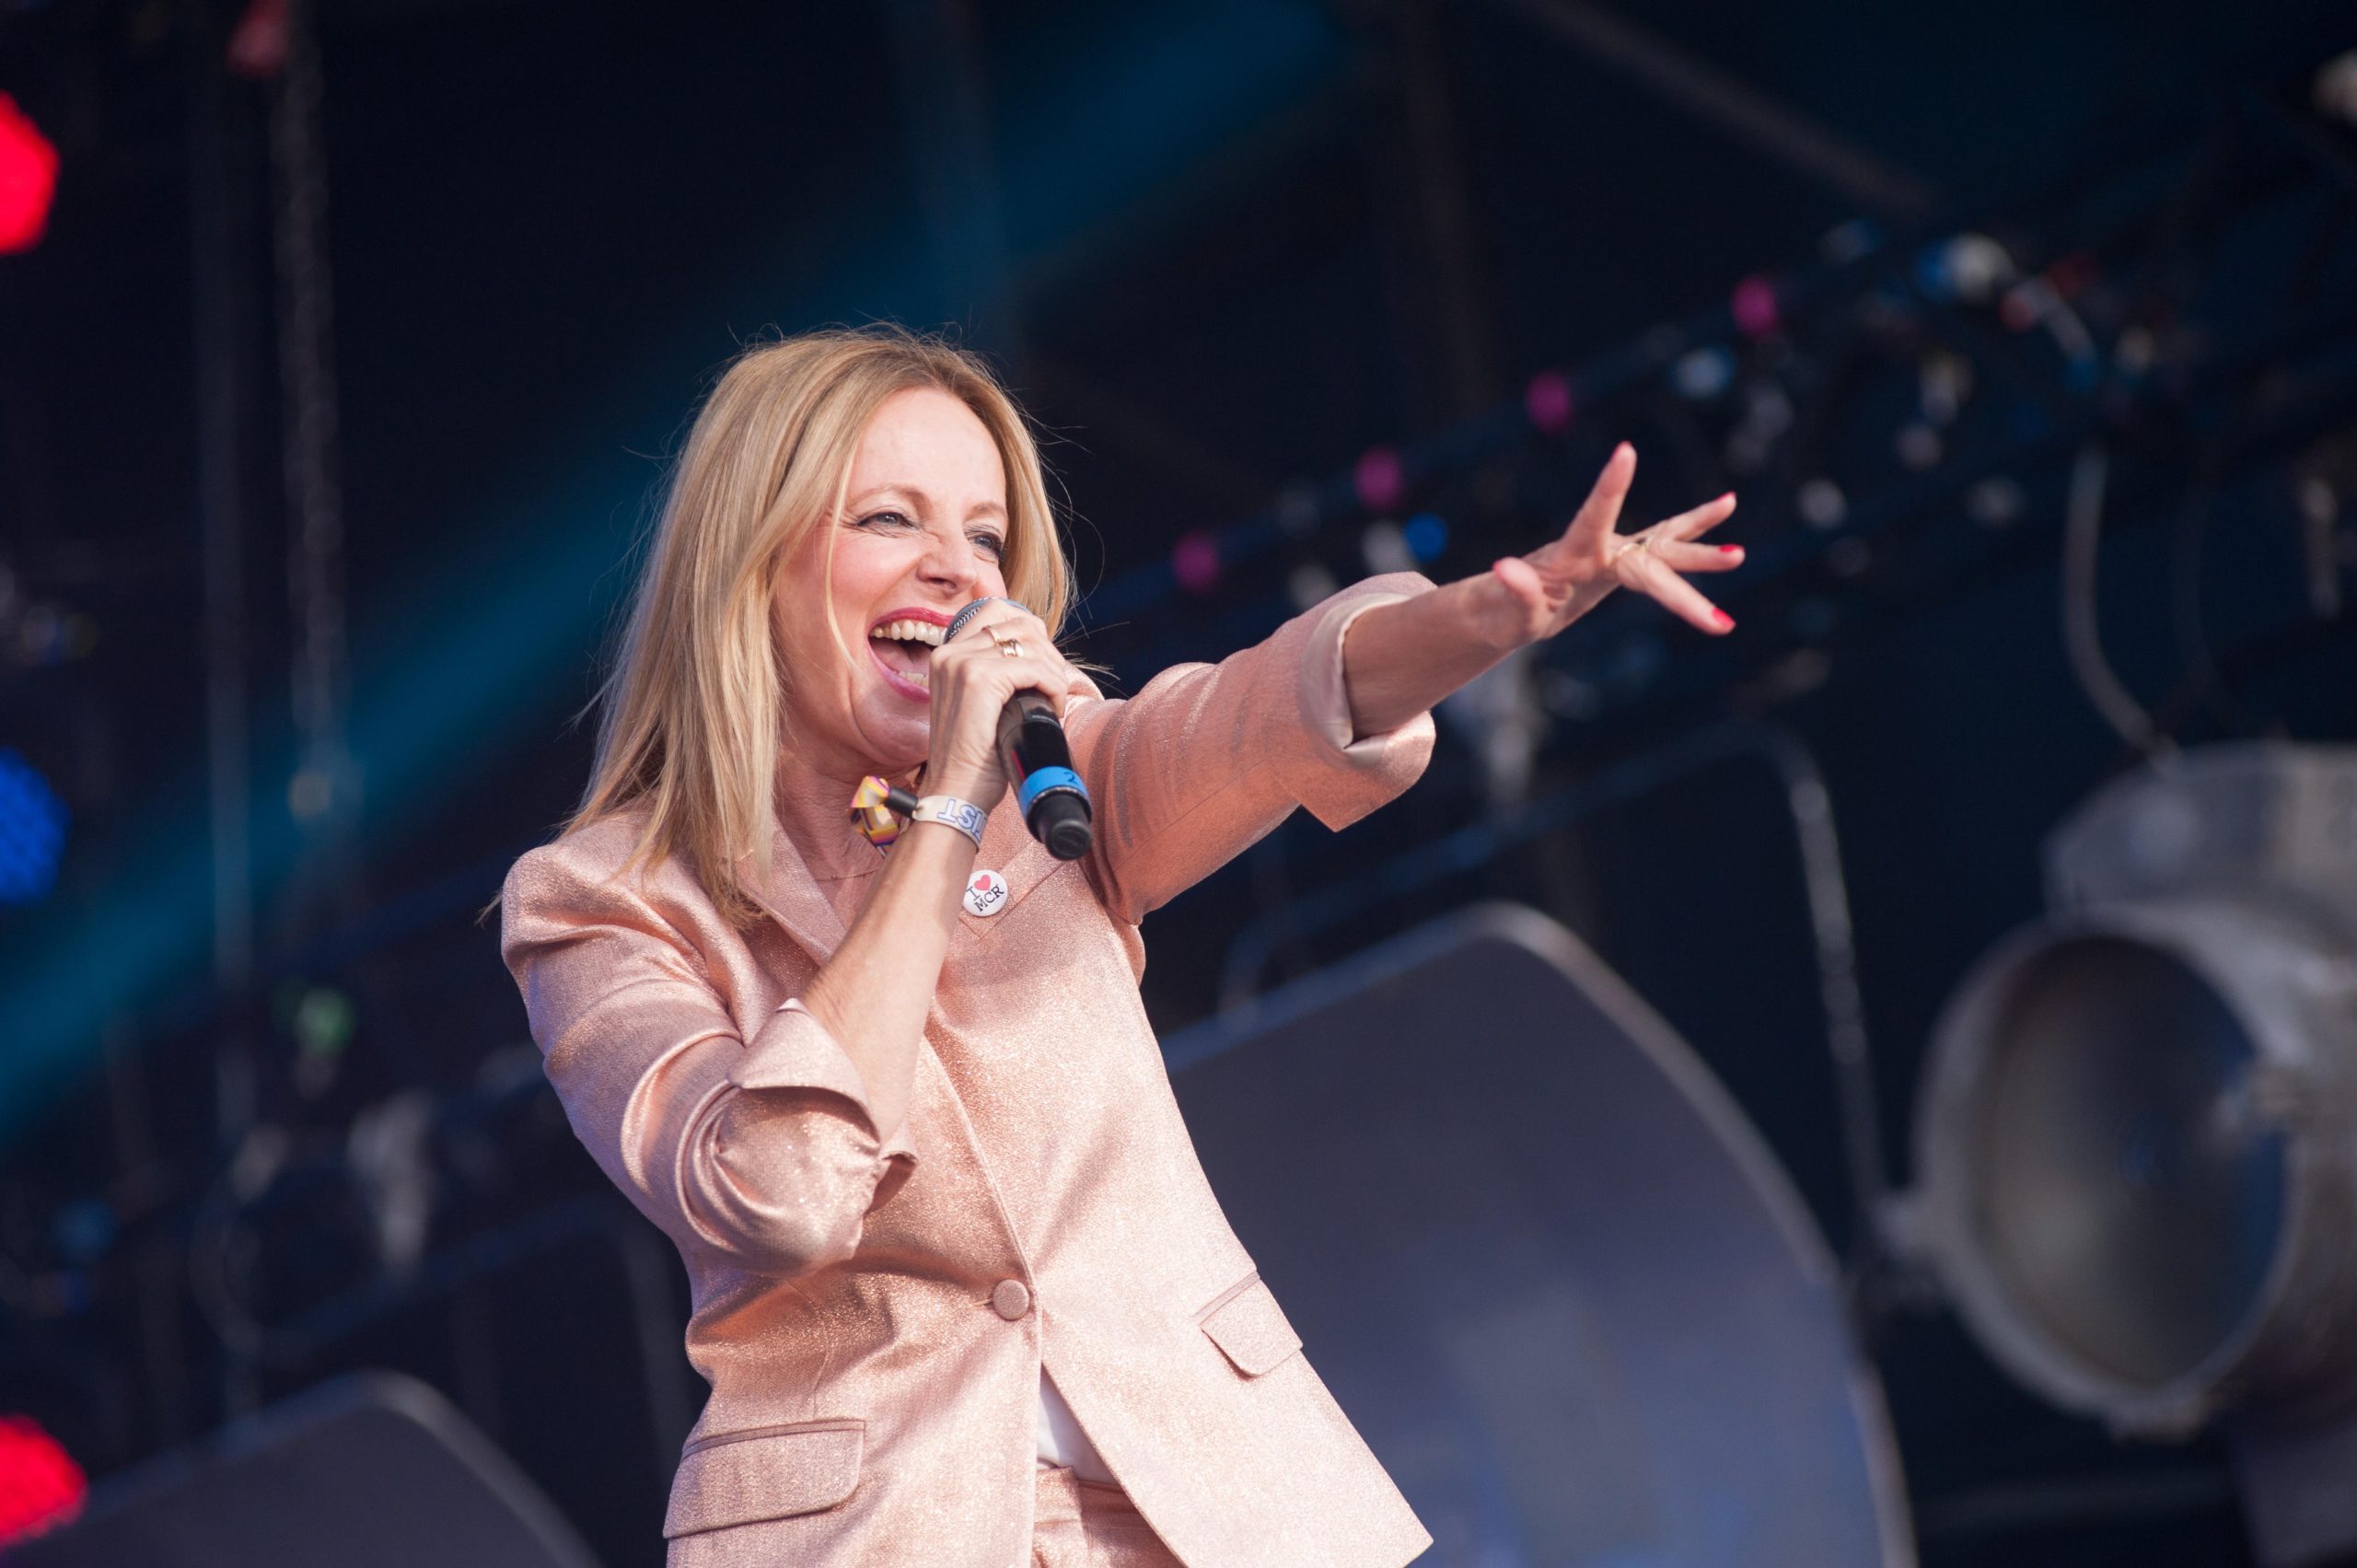 Clare Grogan is lining up Altered Images dates for 2020